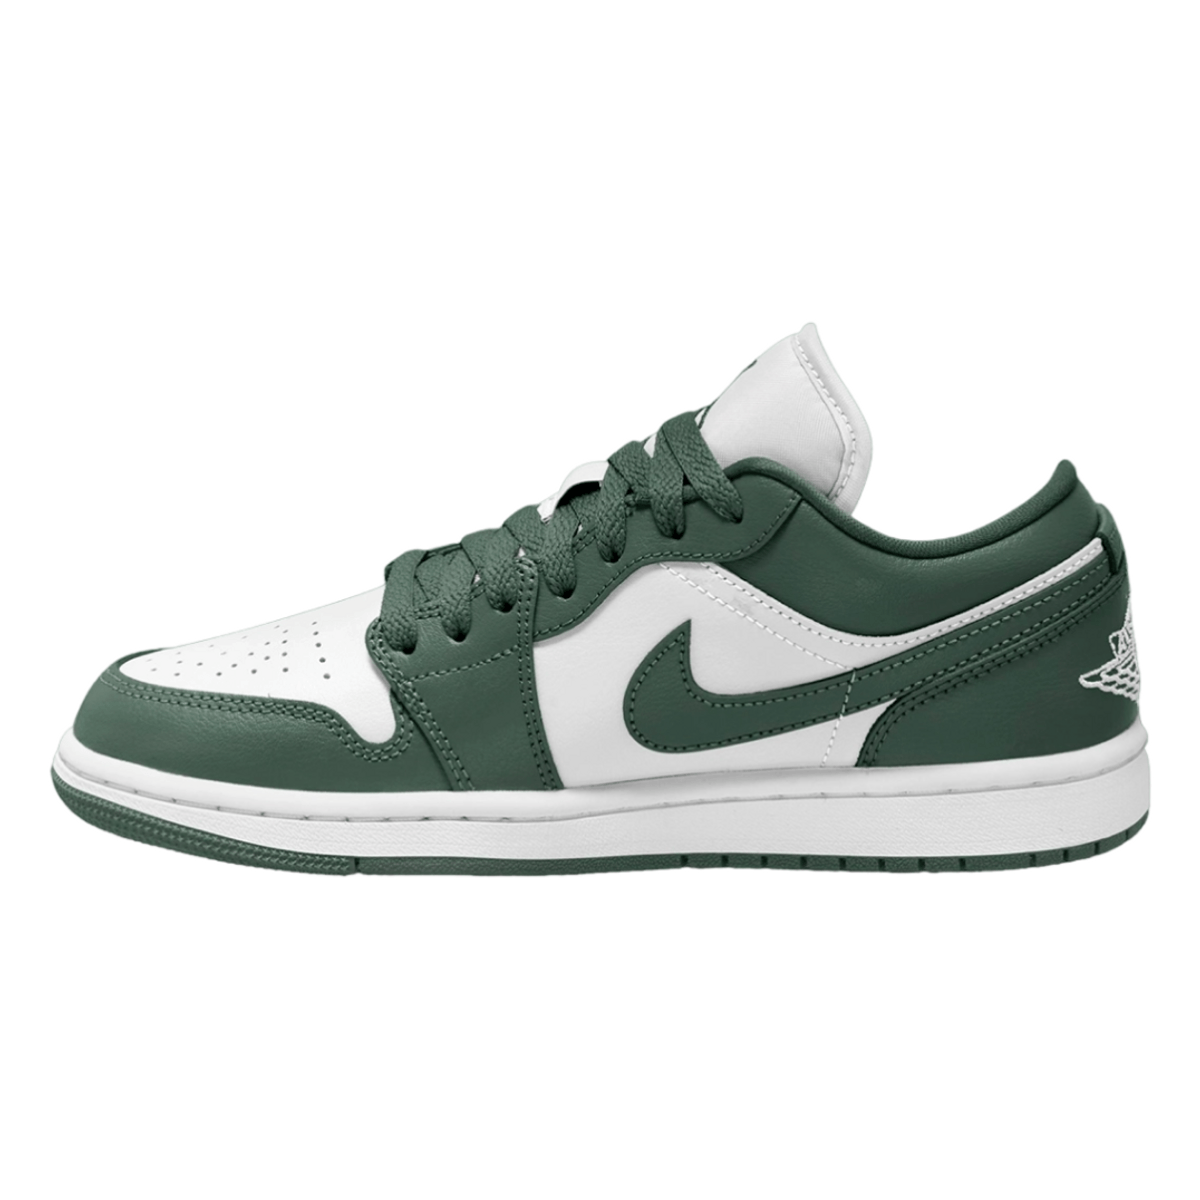 Jordan Brand Will Show Love To The Ladies With The Air Jordan 1 Low White/Green